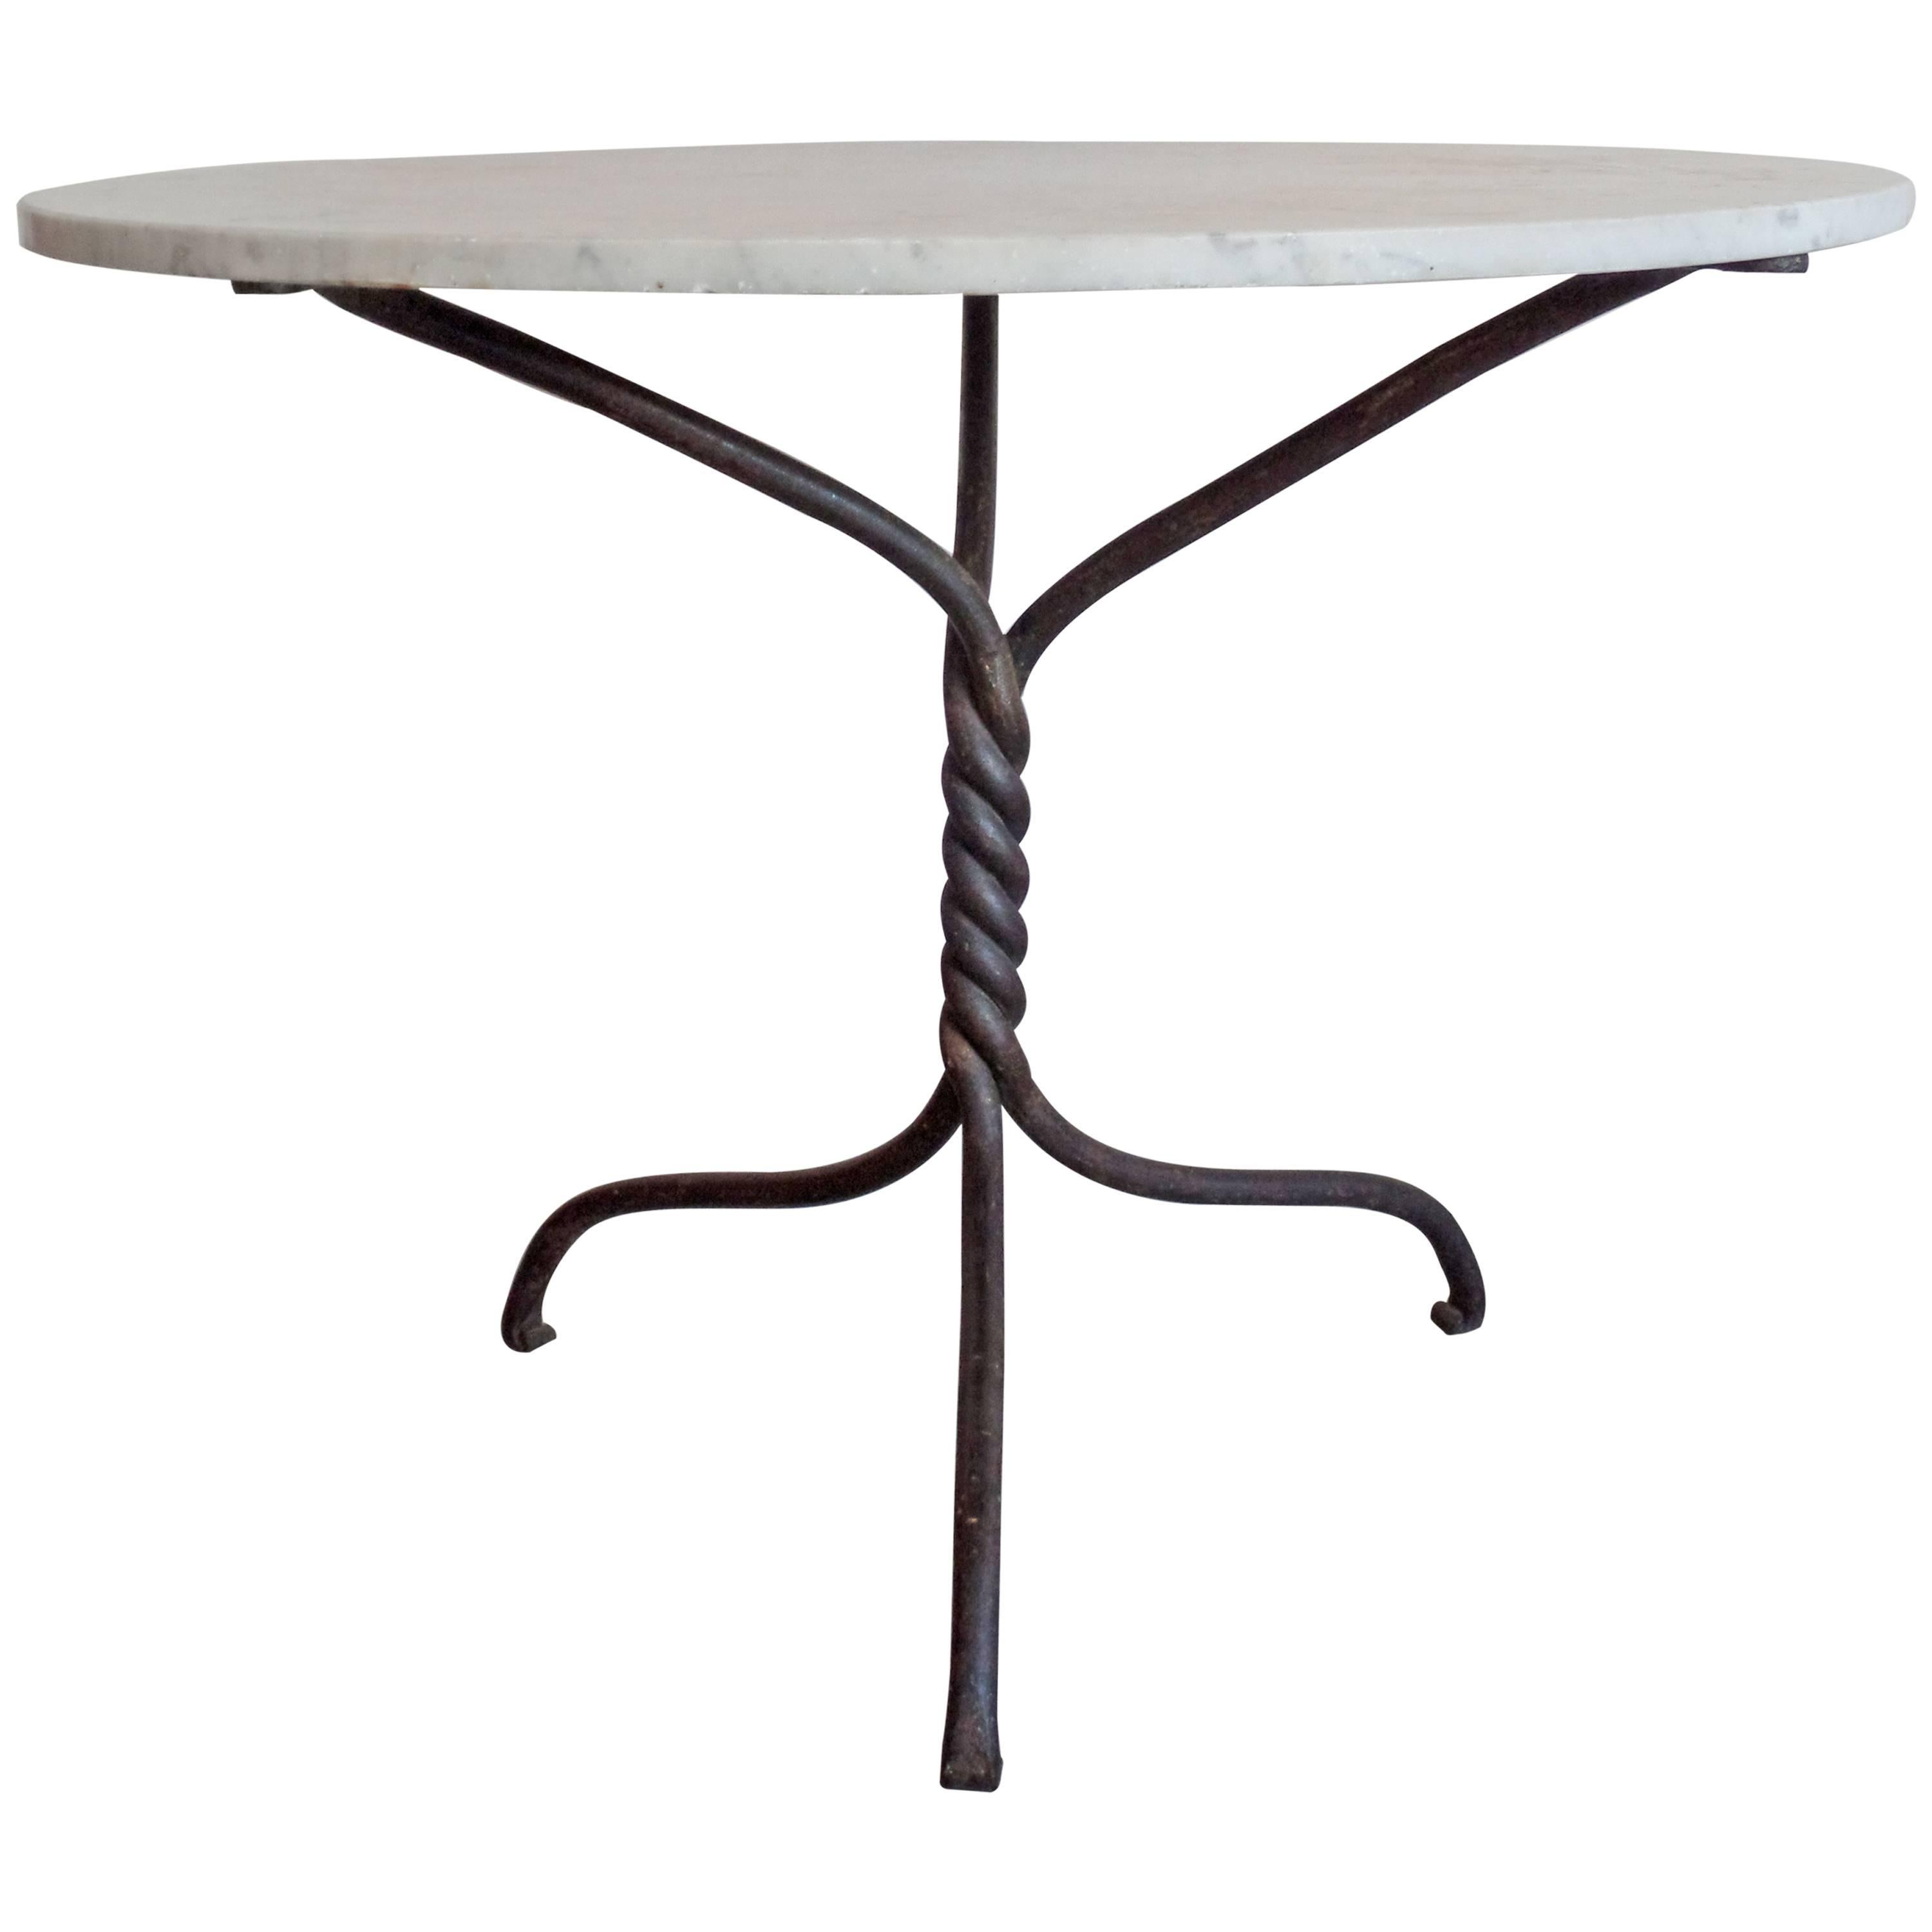 French Modern Neoclassical Hand-Wrought Iron Table Base